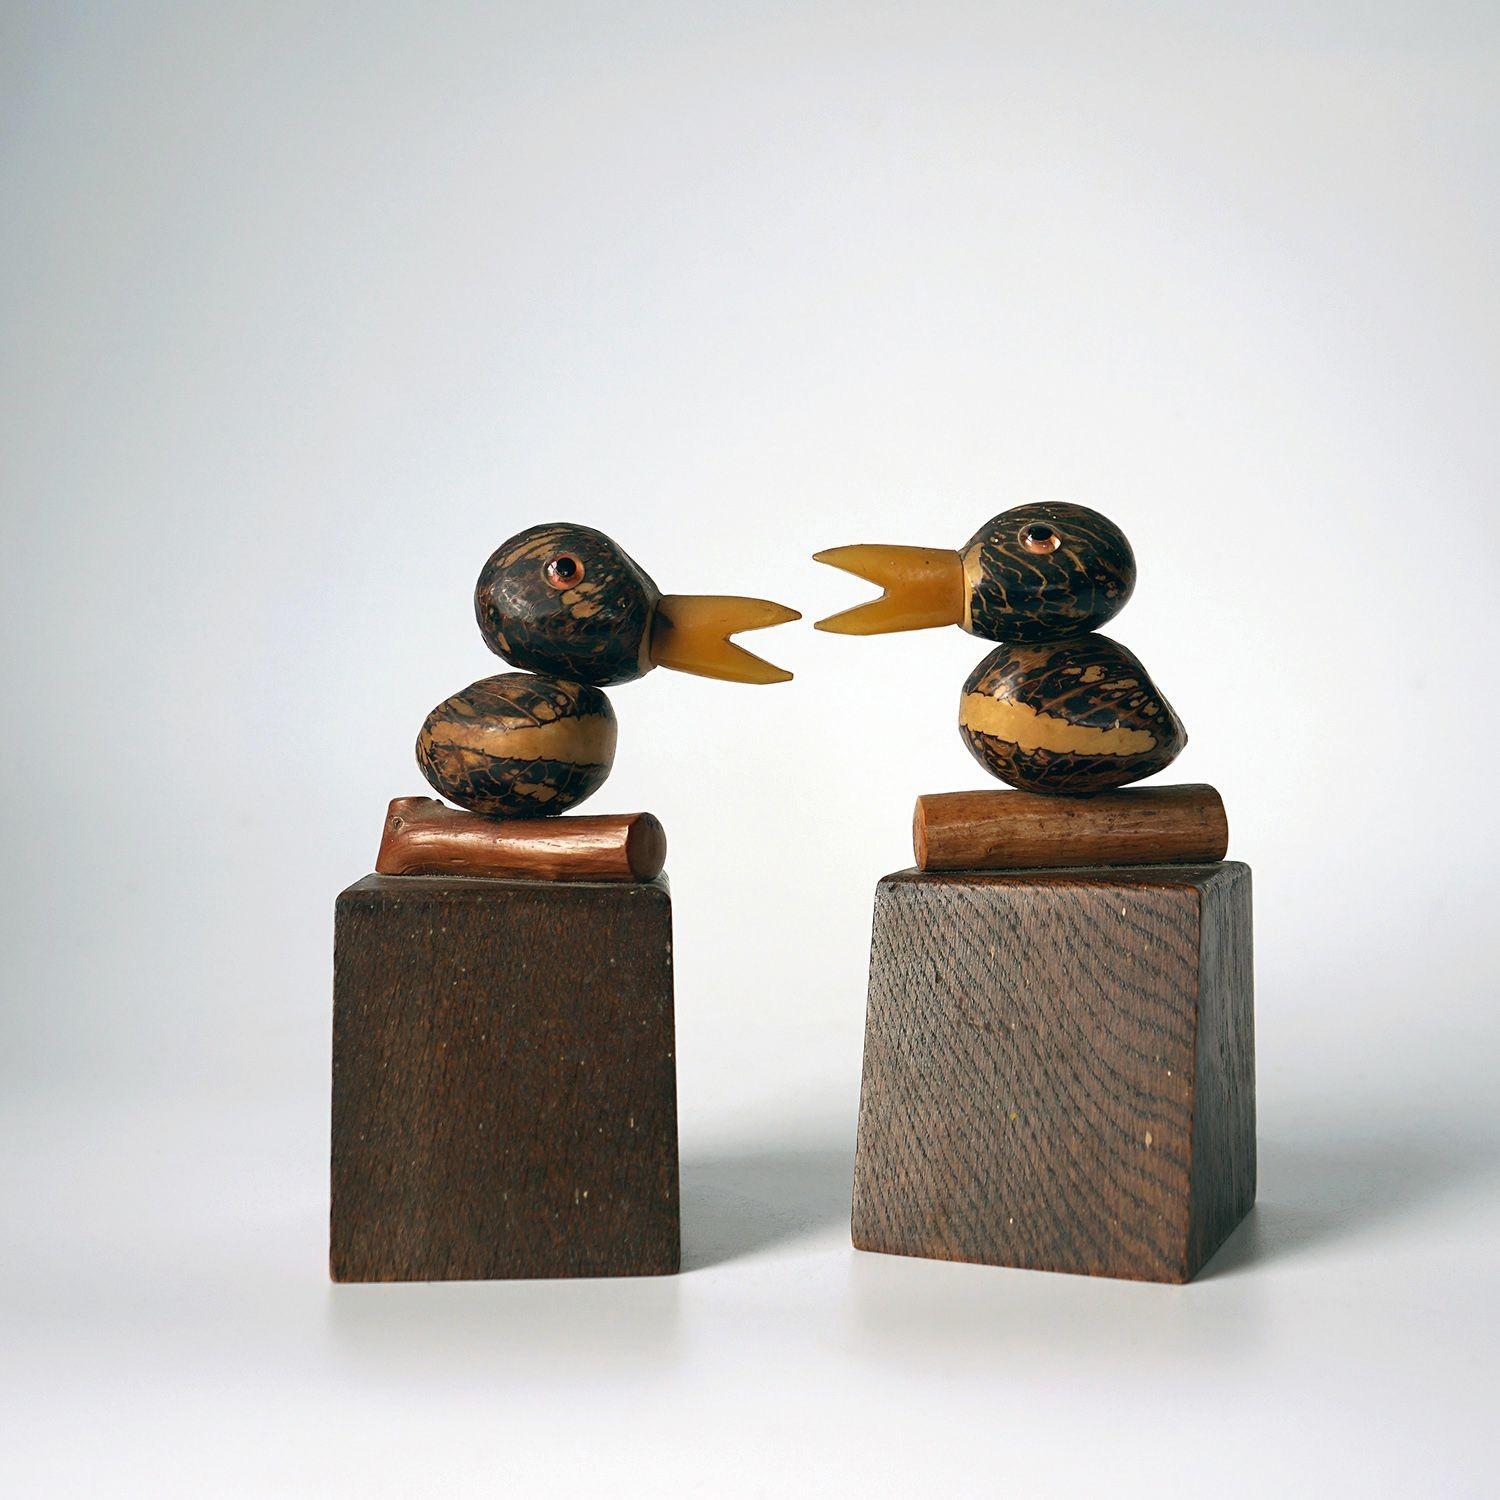 Yz Nut Bird Bookends by Henry Howell and Co. 1920's 3